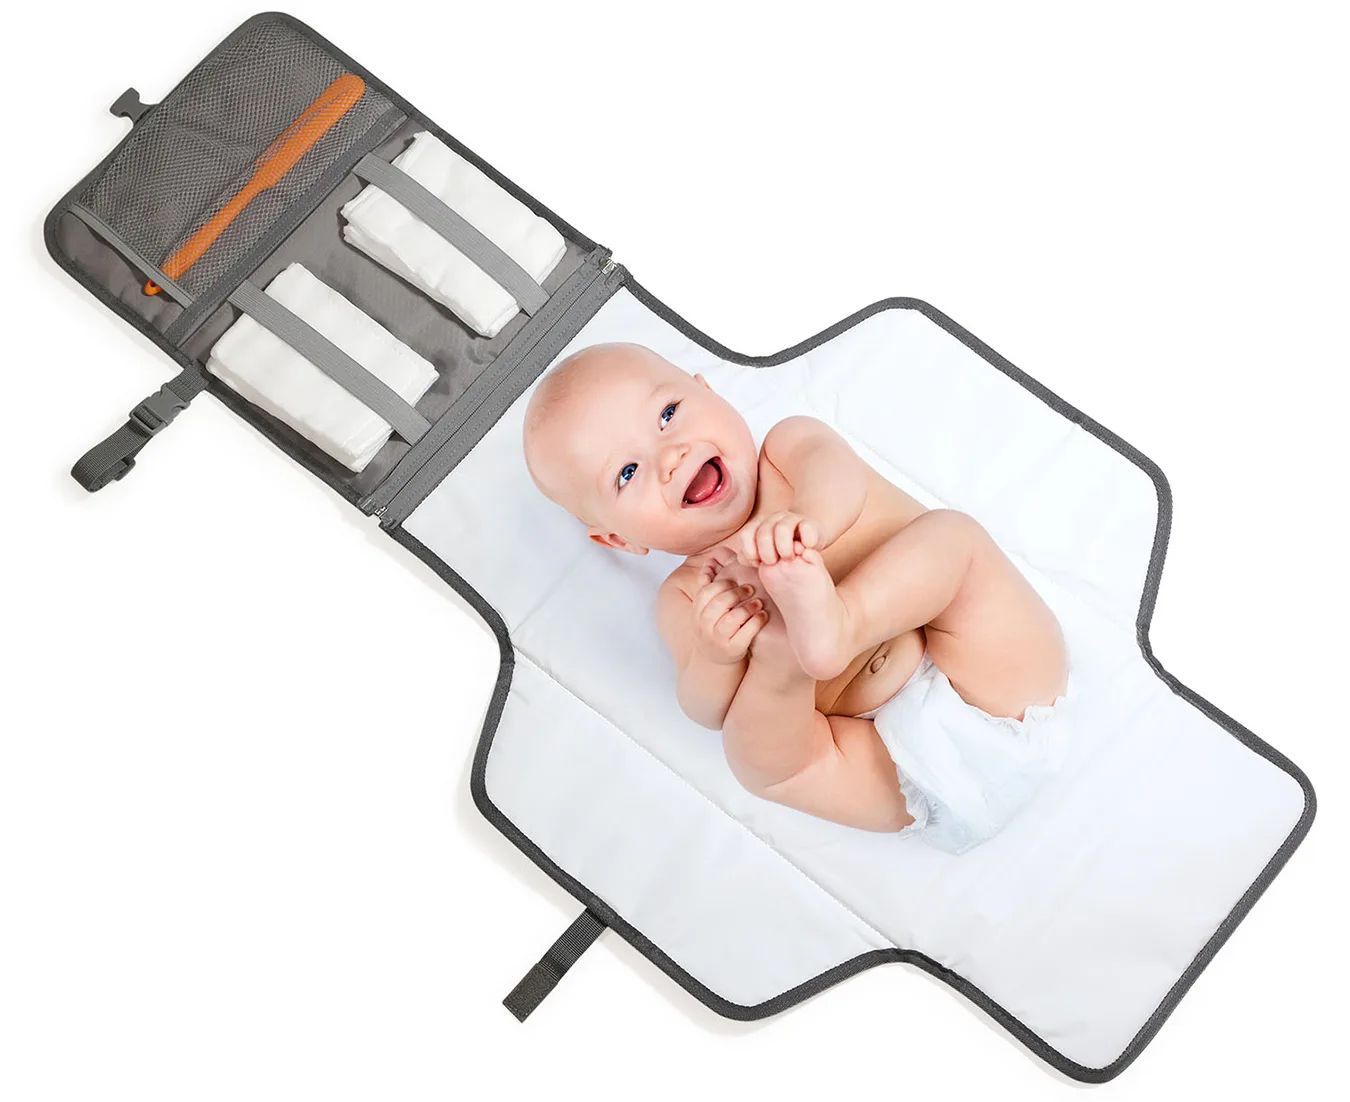 Baby photography on a portable baby changing pad